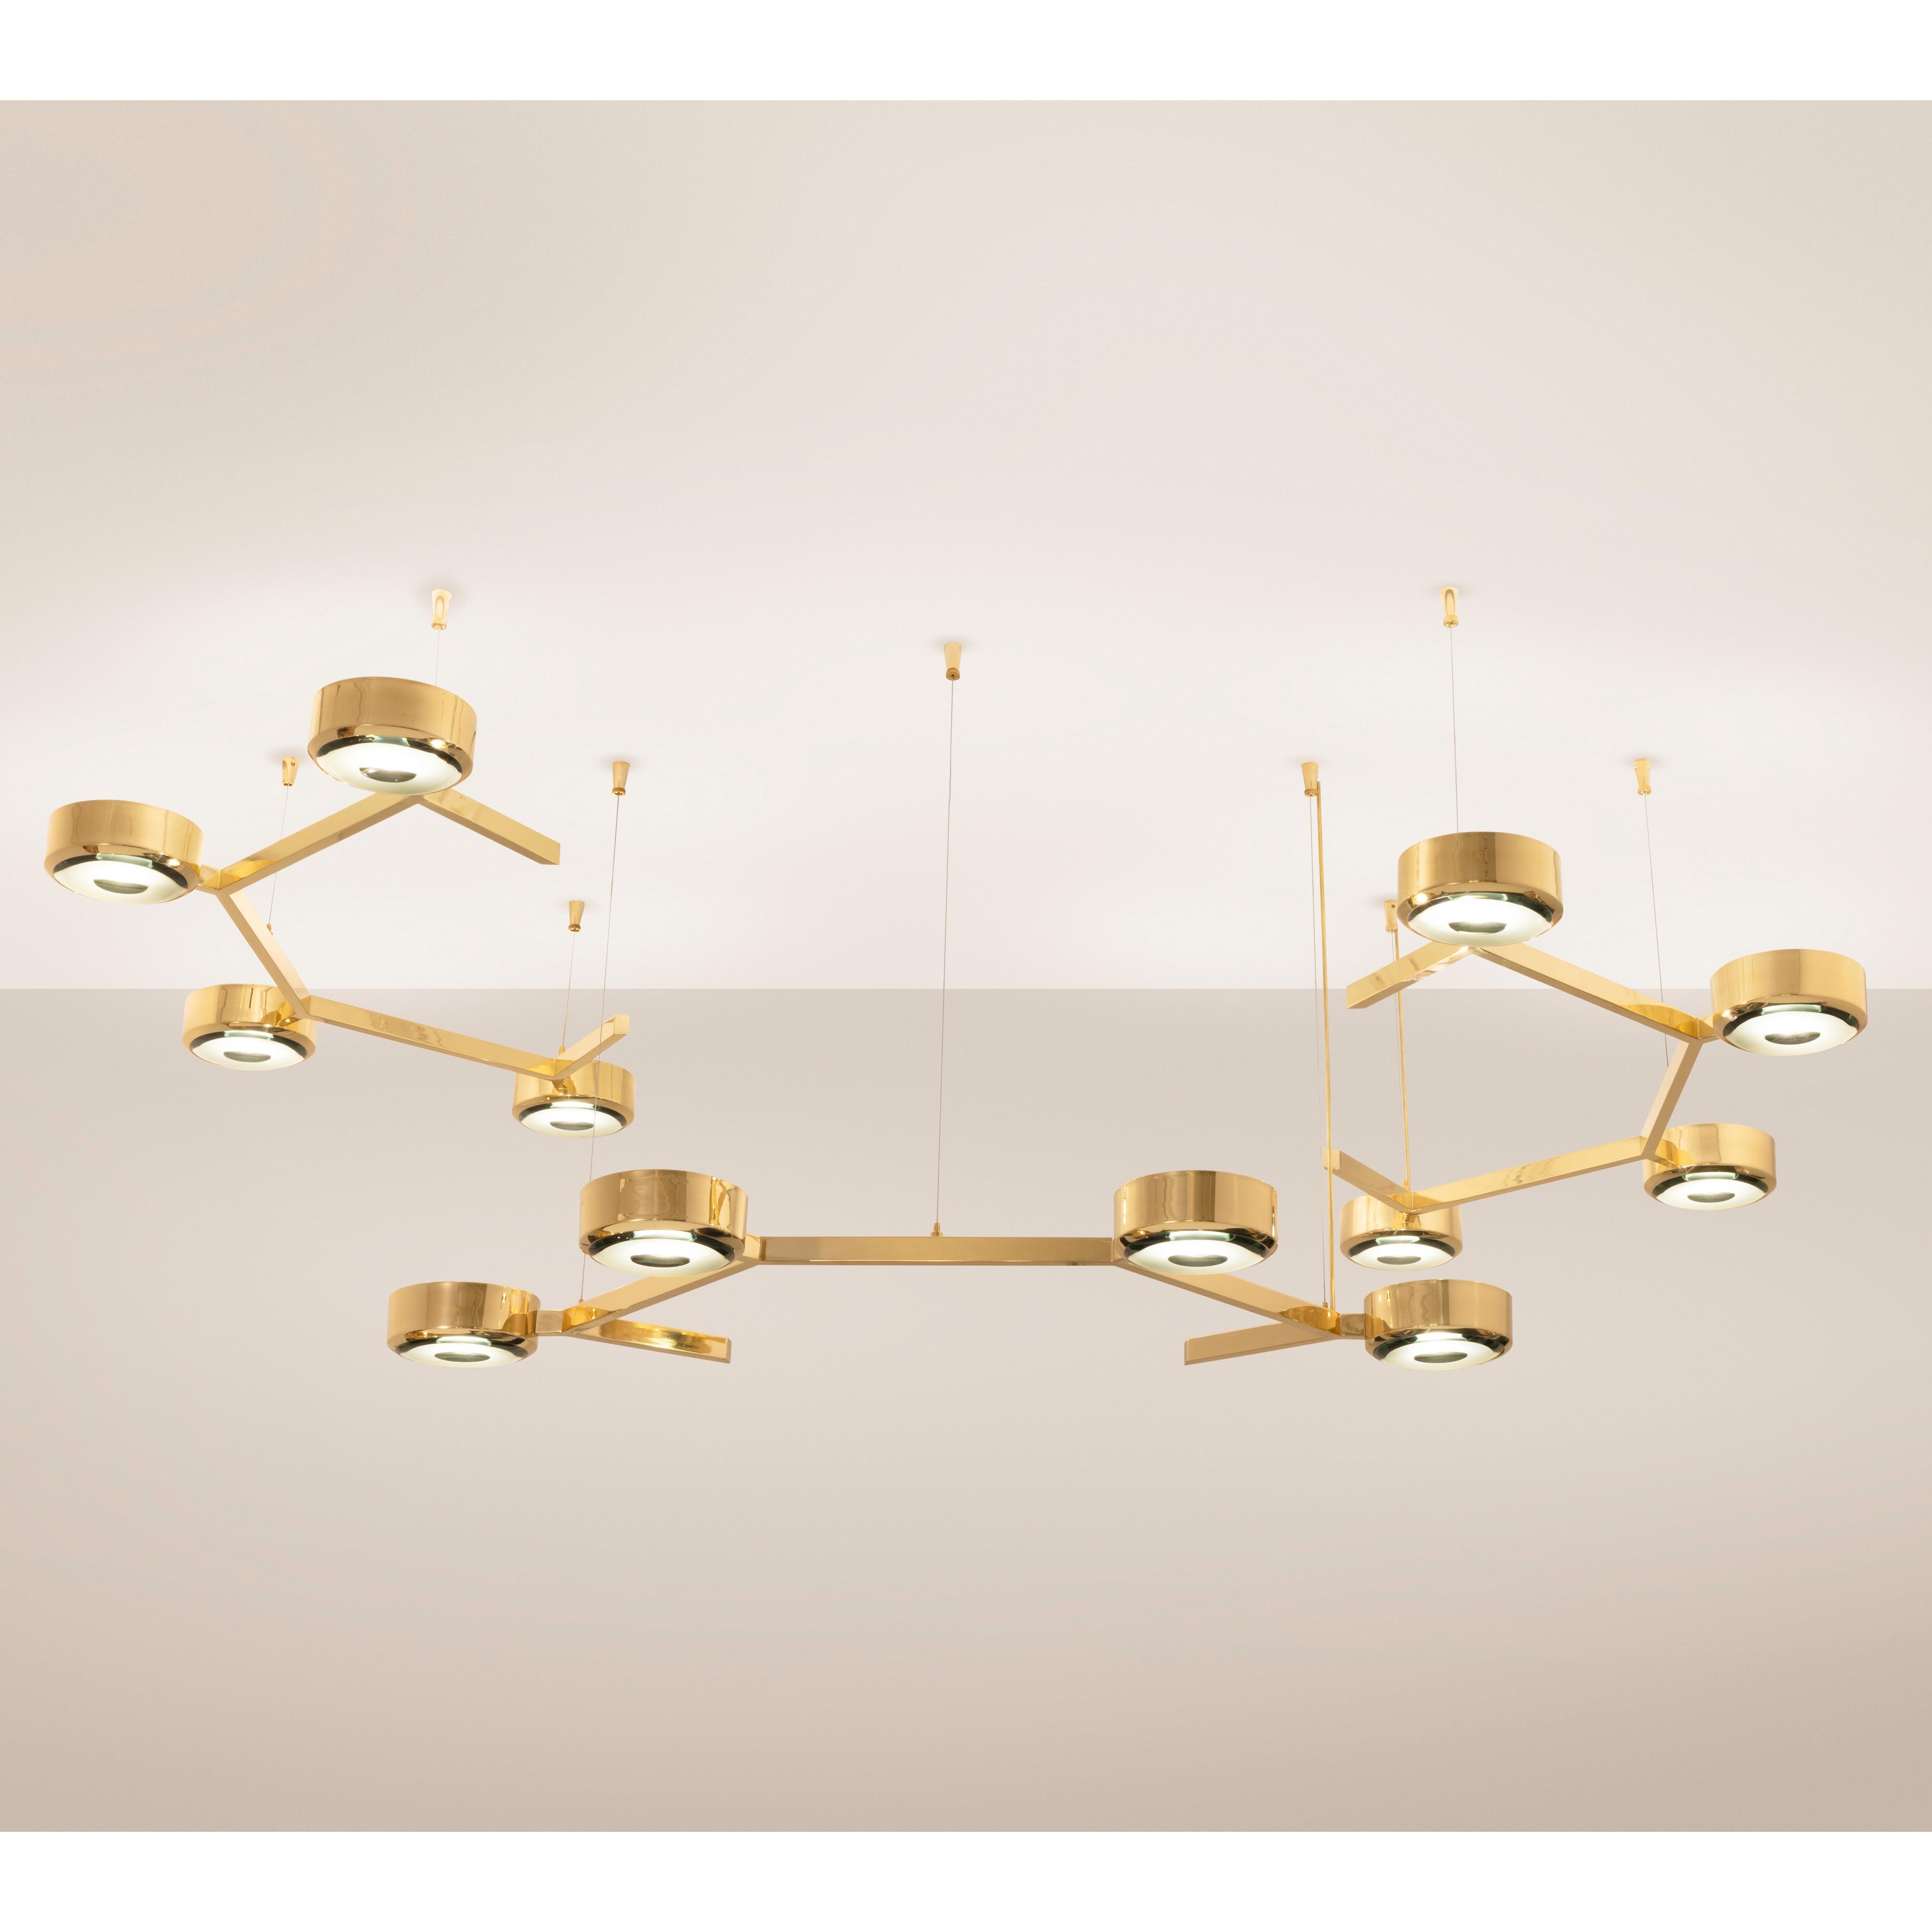 The Elemento by form A is a modular ceiling fixture composed of suspended “C” shaped elements with four glass shades. Shown as a staggered composition of three elements in polished brass with our carved glass made in Milan.

Customization Options: